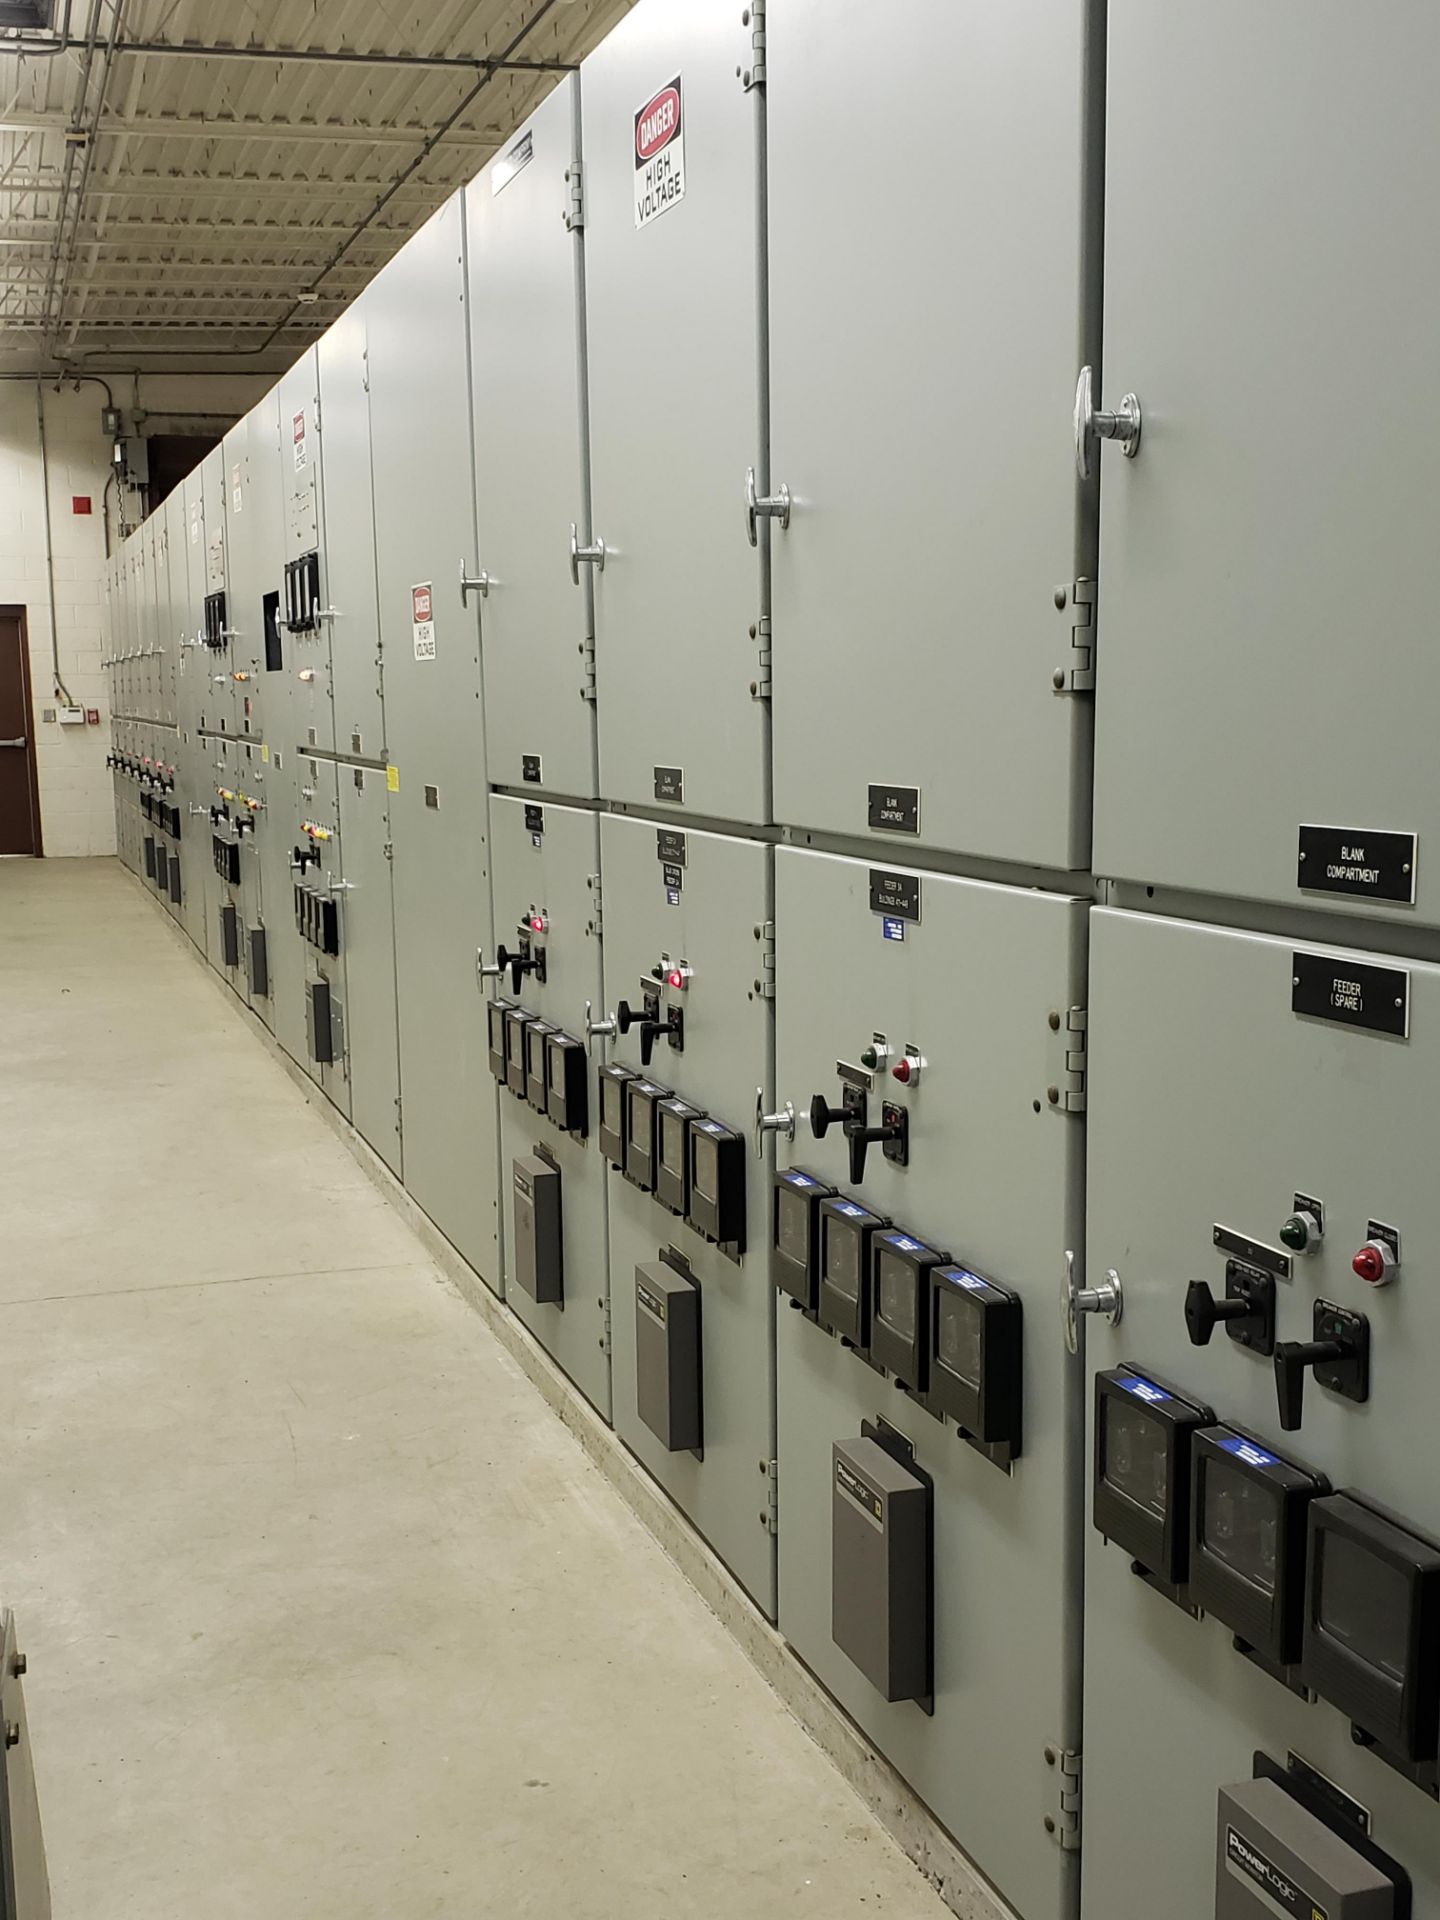 Electrical substation serving the TecPort business park - Image 8 of 15